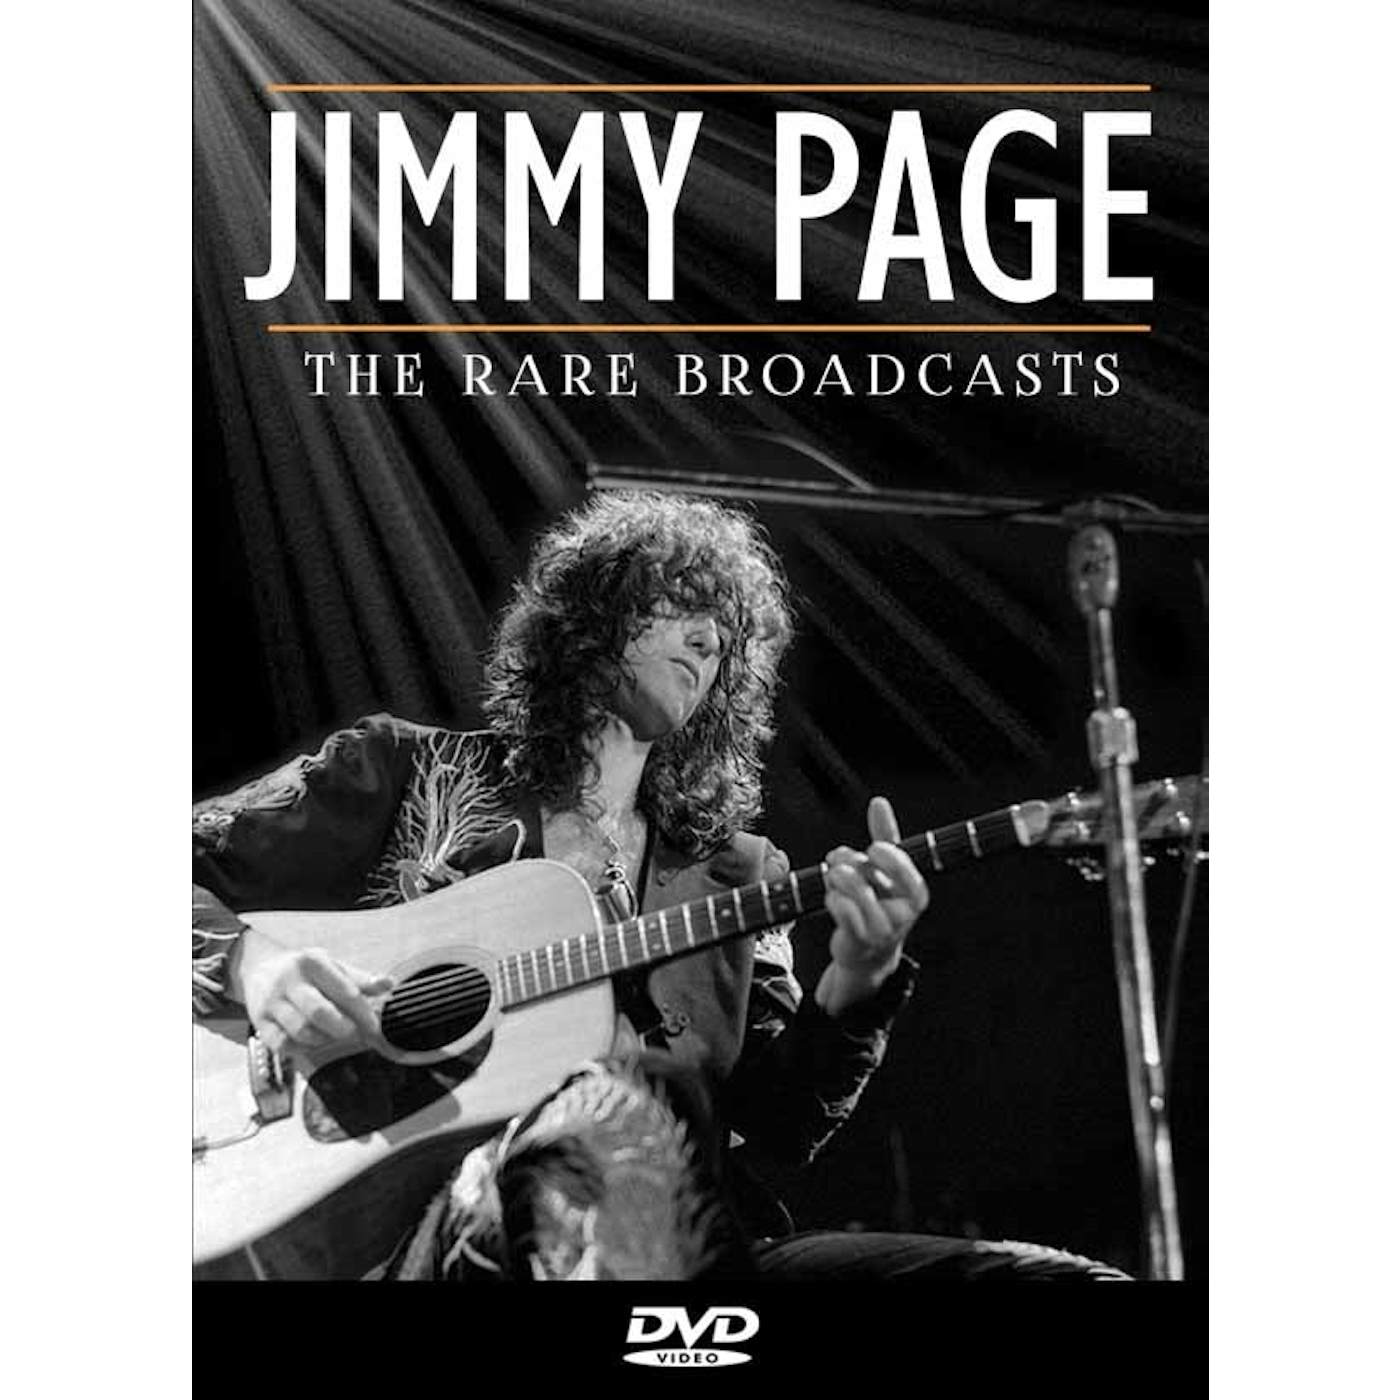 Jimmy Page DVD - The Rare Broadcasts